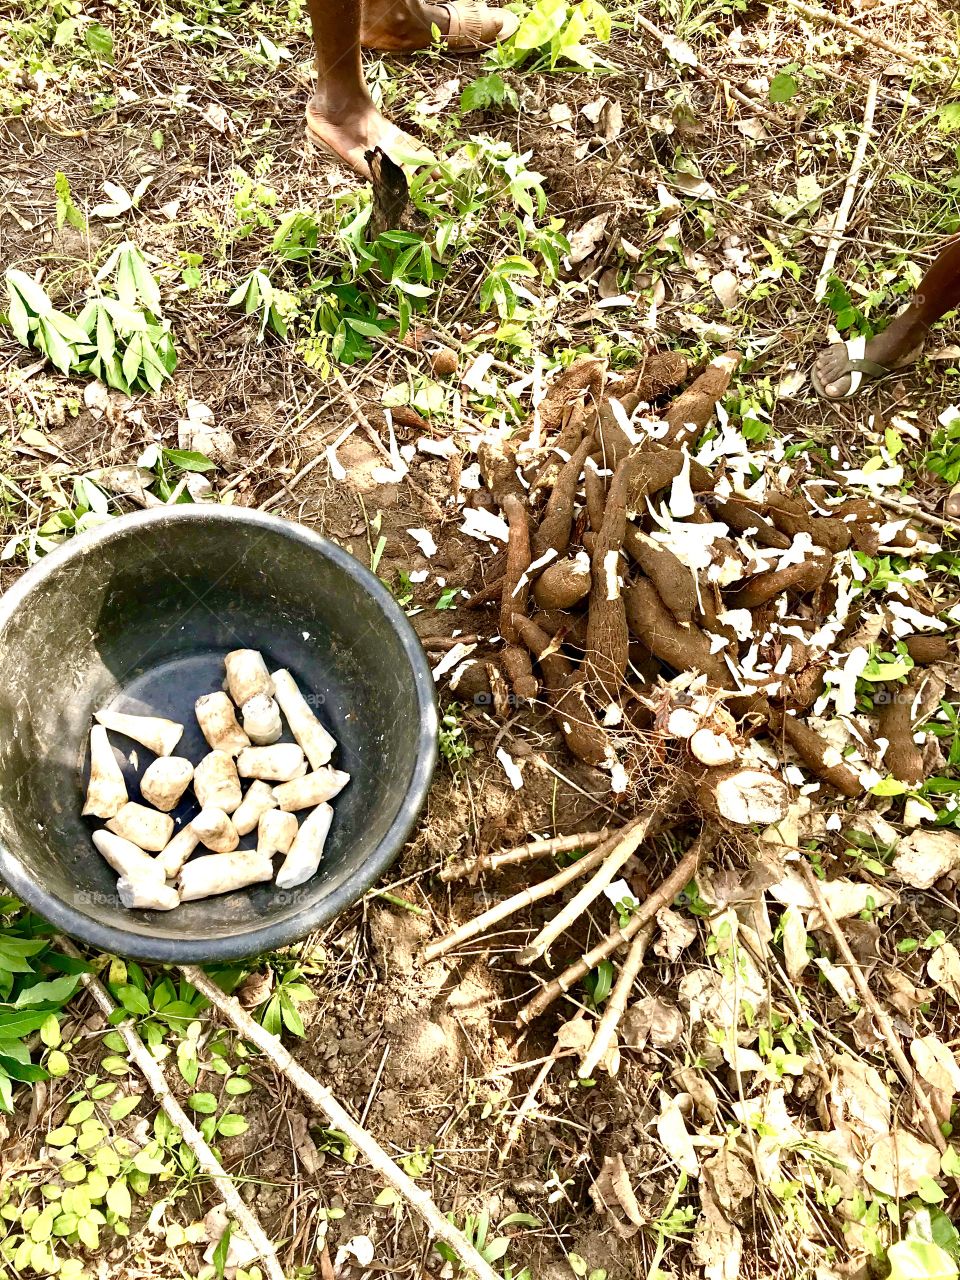 Harvested cassava, some peeled and some unpeeled, to be made into fufu or garri 